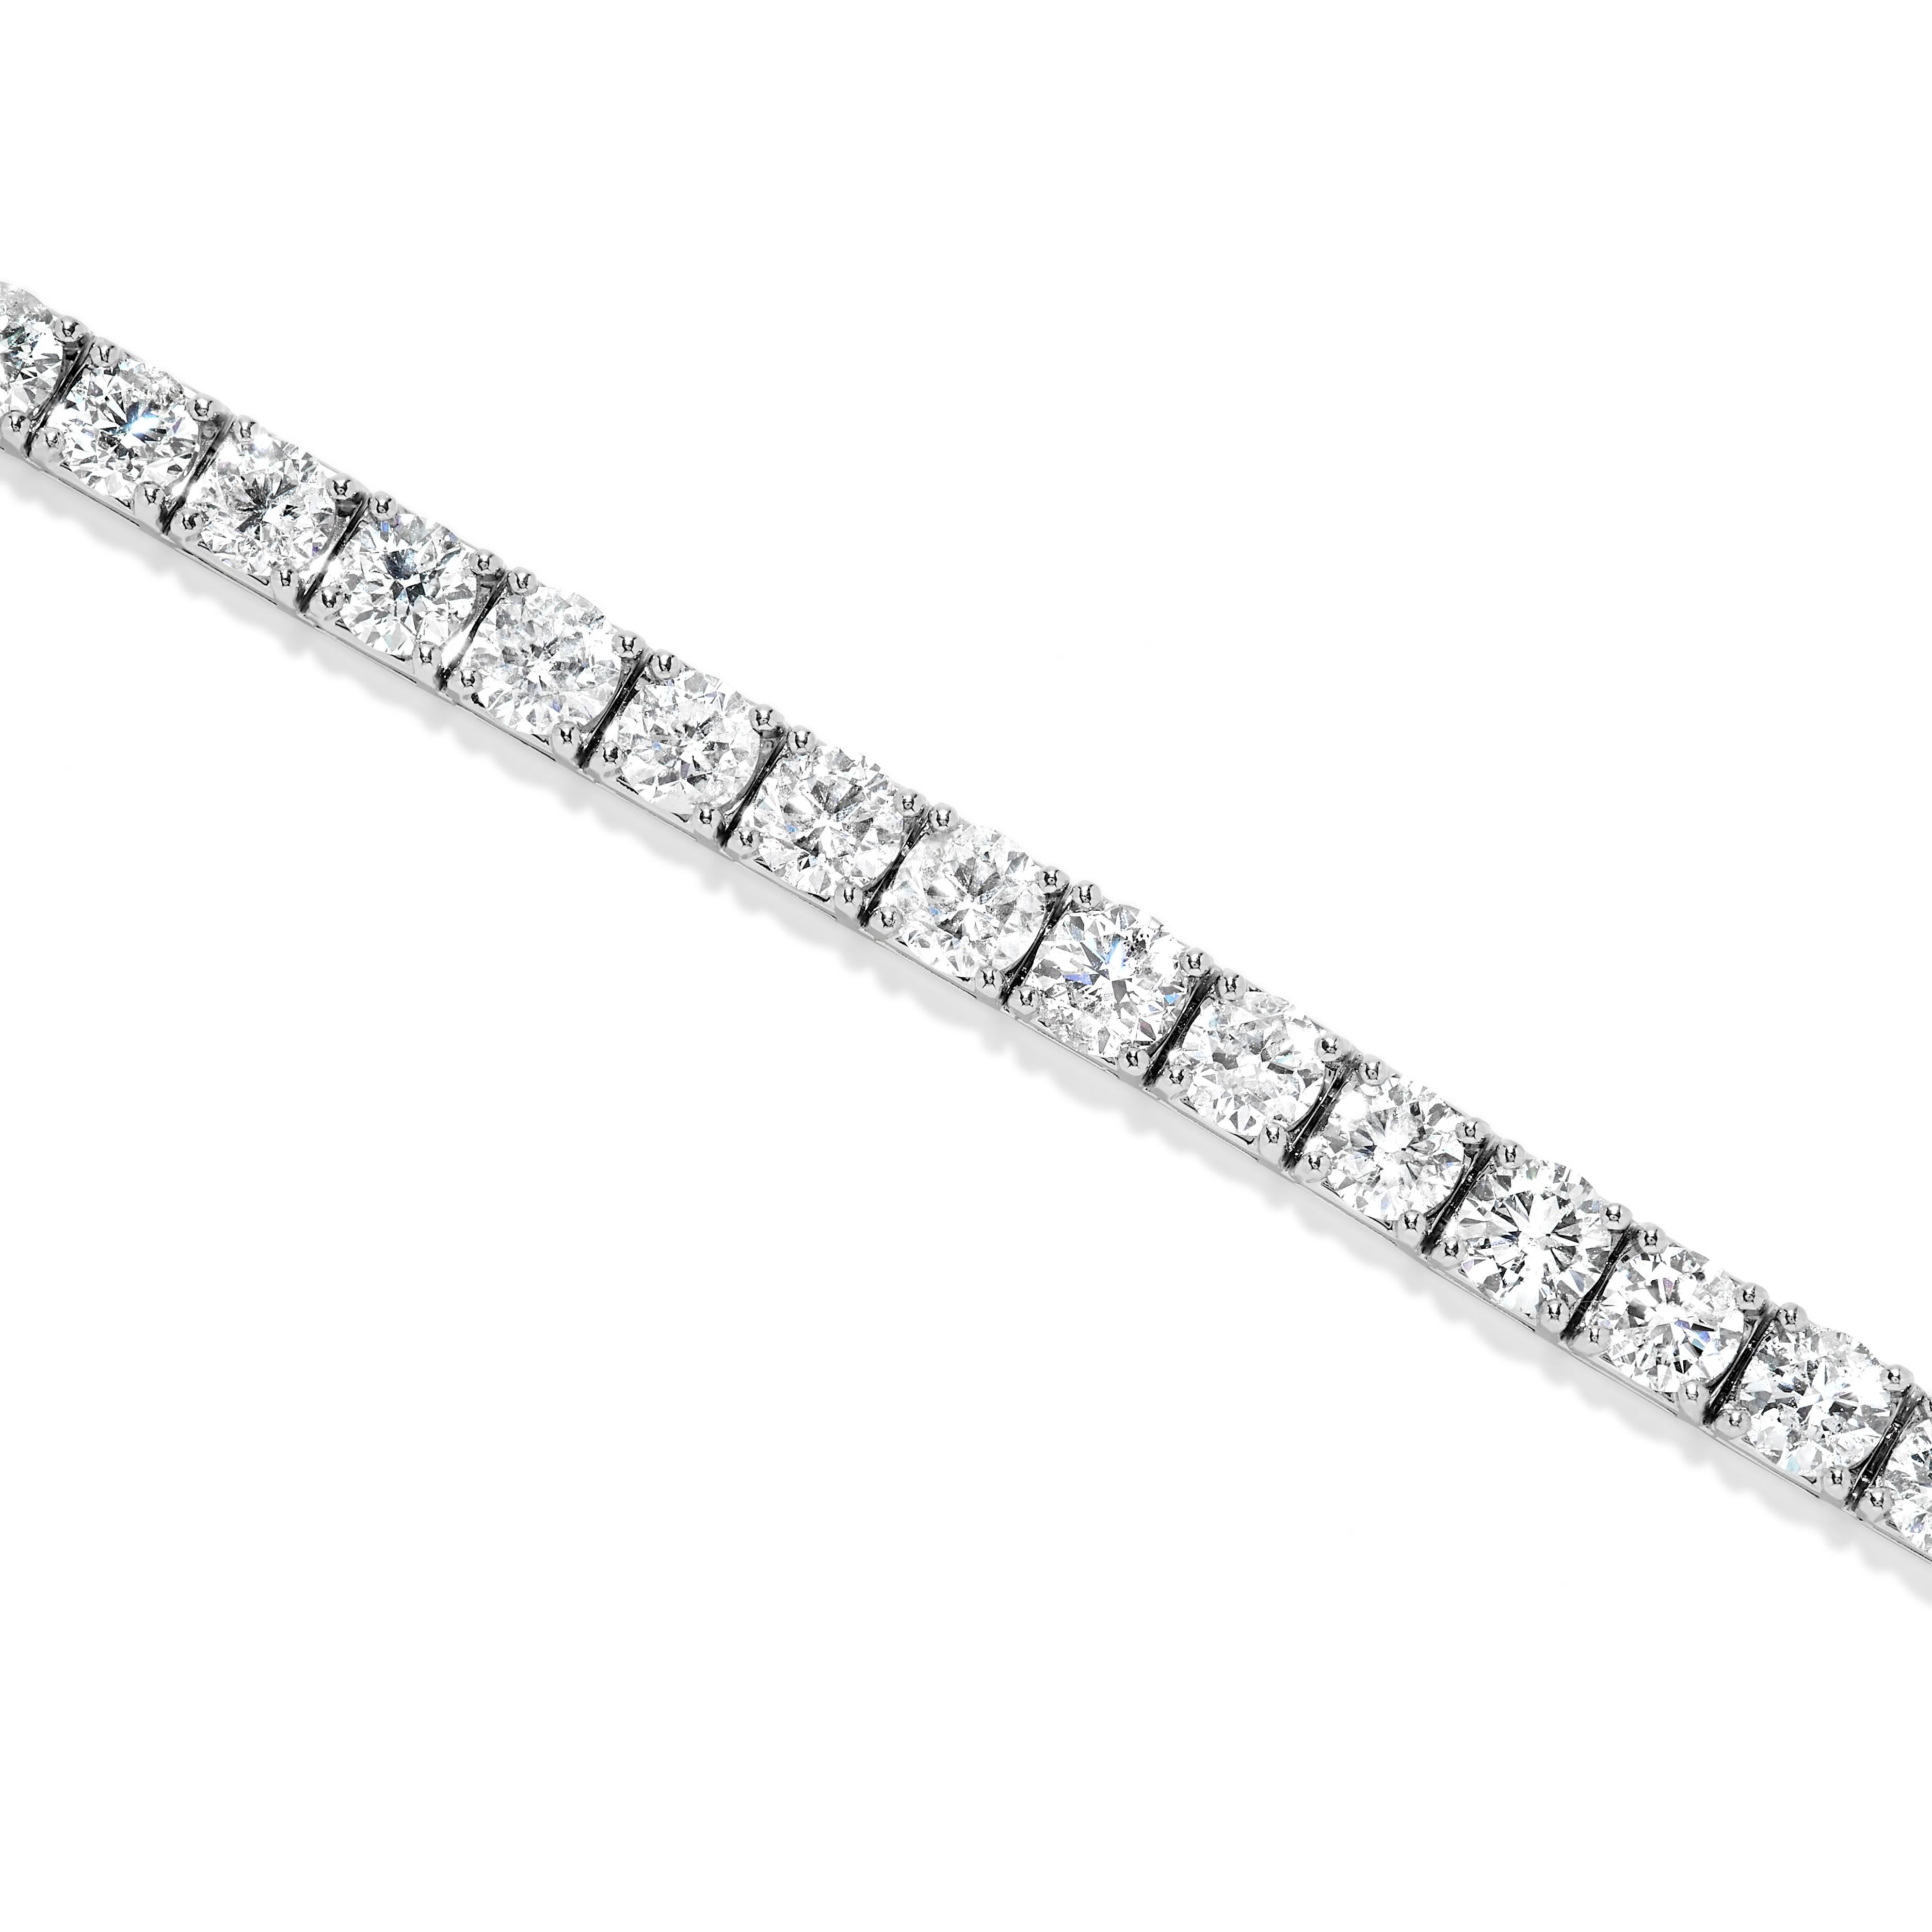 Straight Line Platinum bracelet with 25 round diamonds with a total weight of 26.10 carats.
Approximately G - H Color and I1 - I2 clarity. Completely clean to the eye
7 inches long - 46 grams 